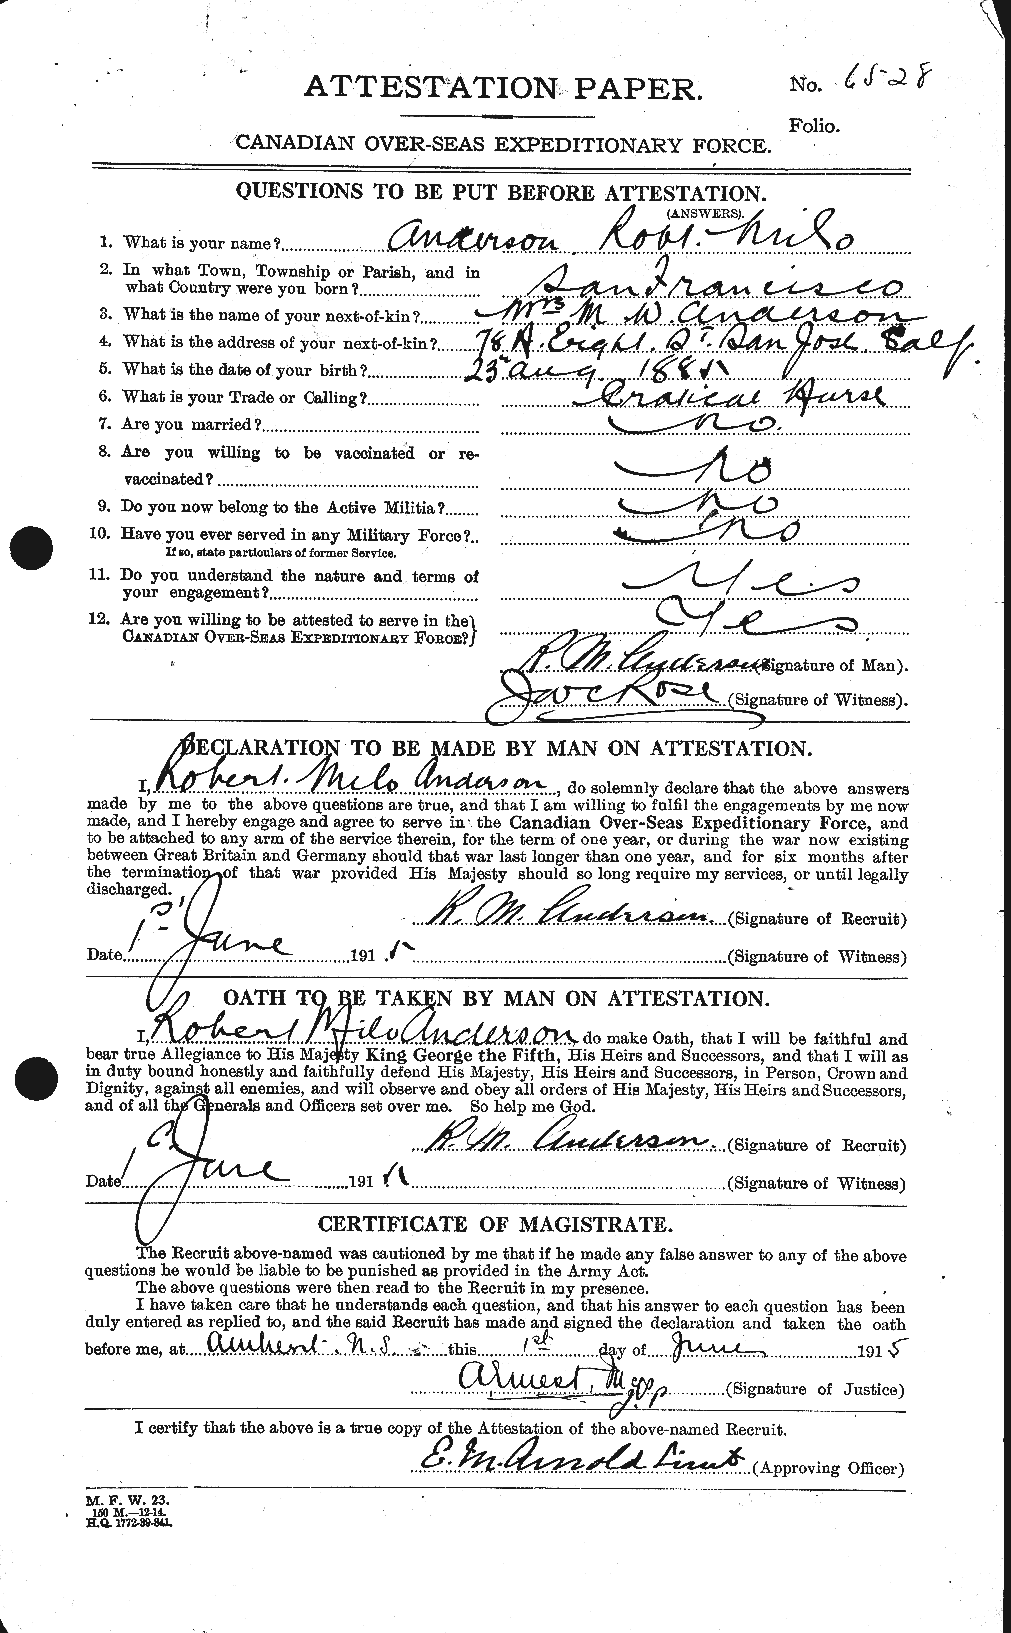 Personnel Records of the First World War - CEF 207232a